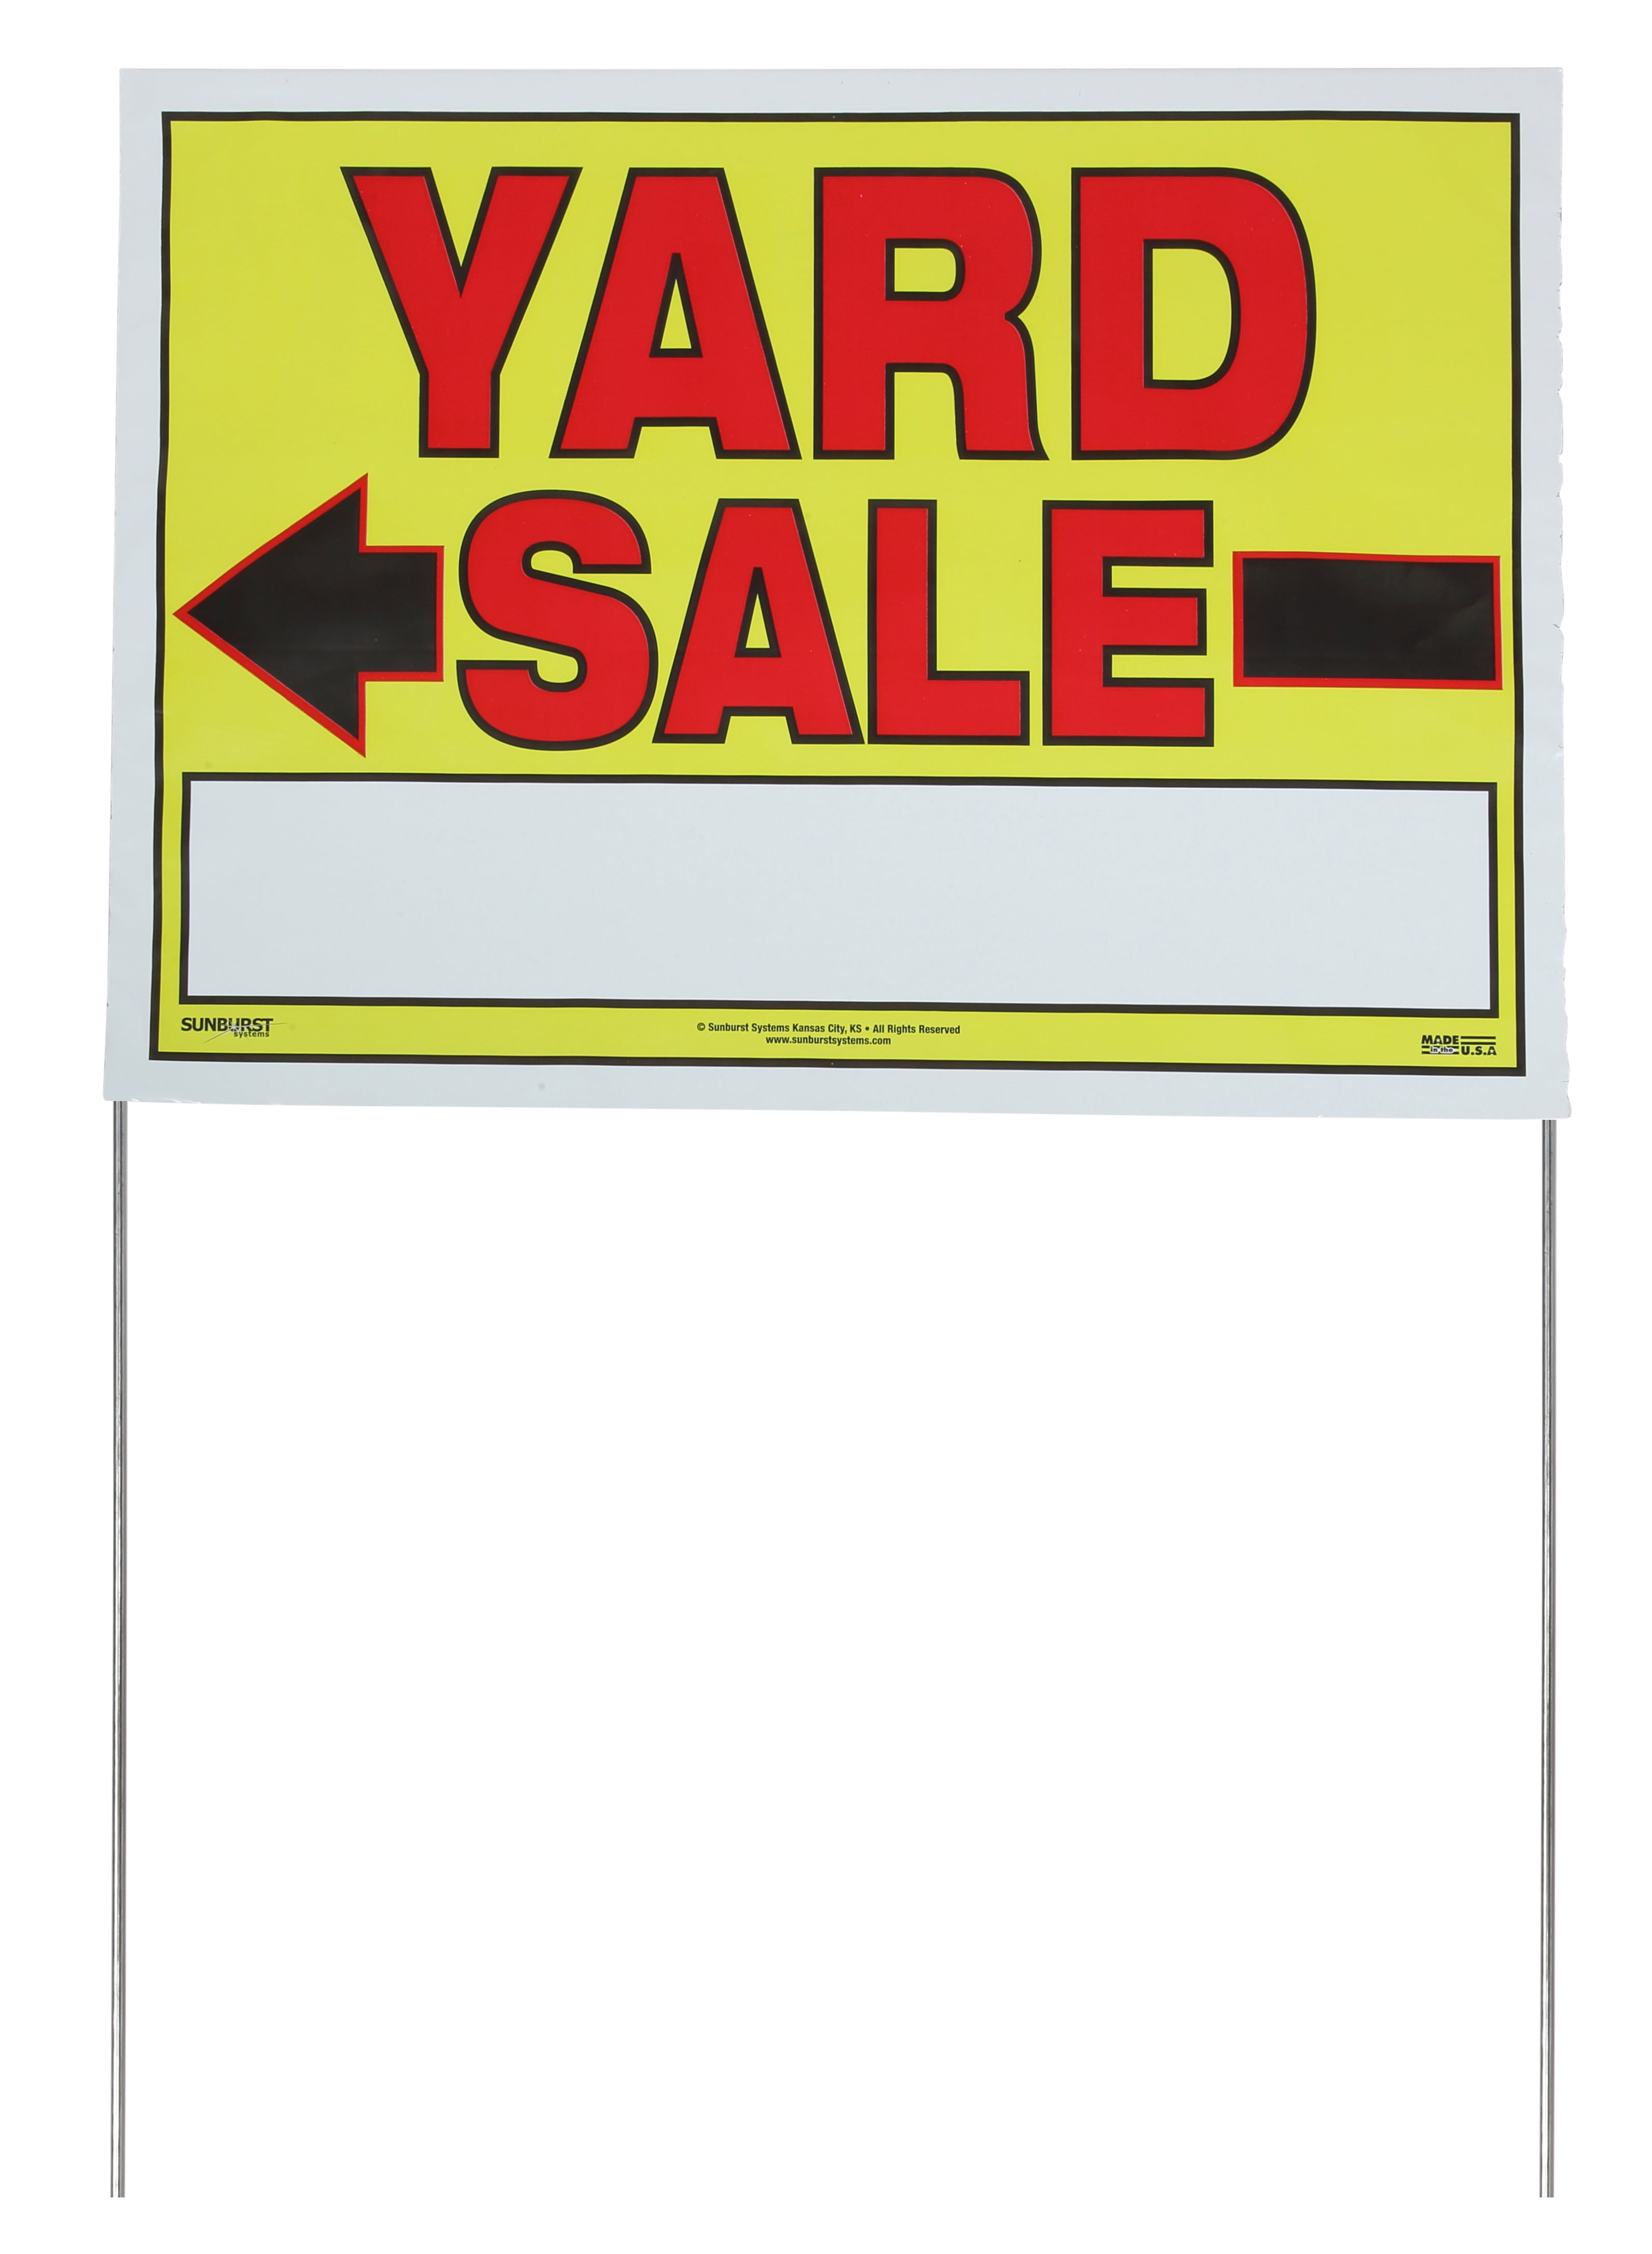 ESTATE SALE "TODAY" WITH ARROW Sandwich Board Sign 2-sided Kit NEW white 